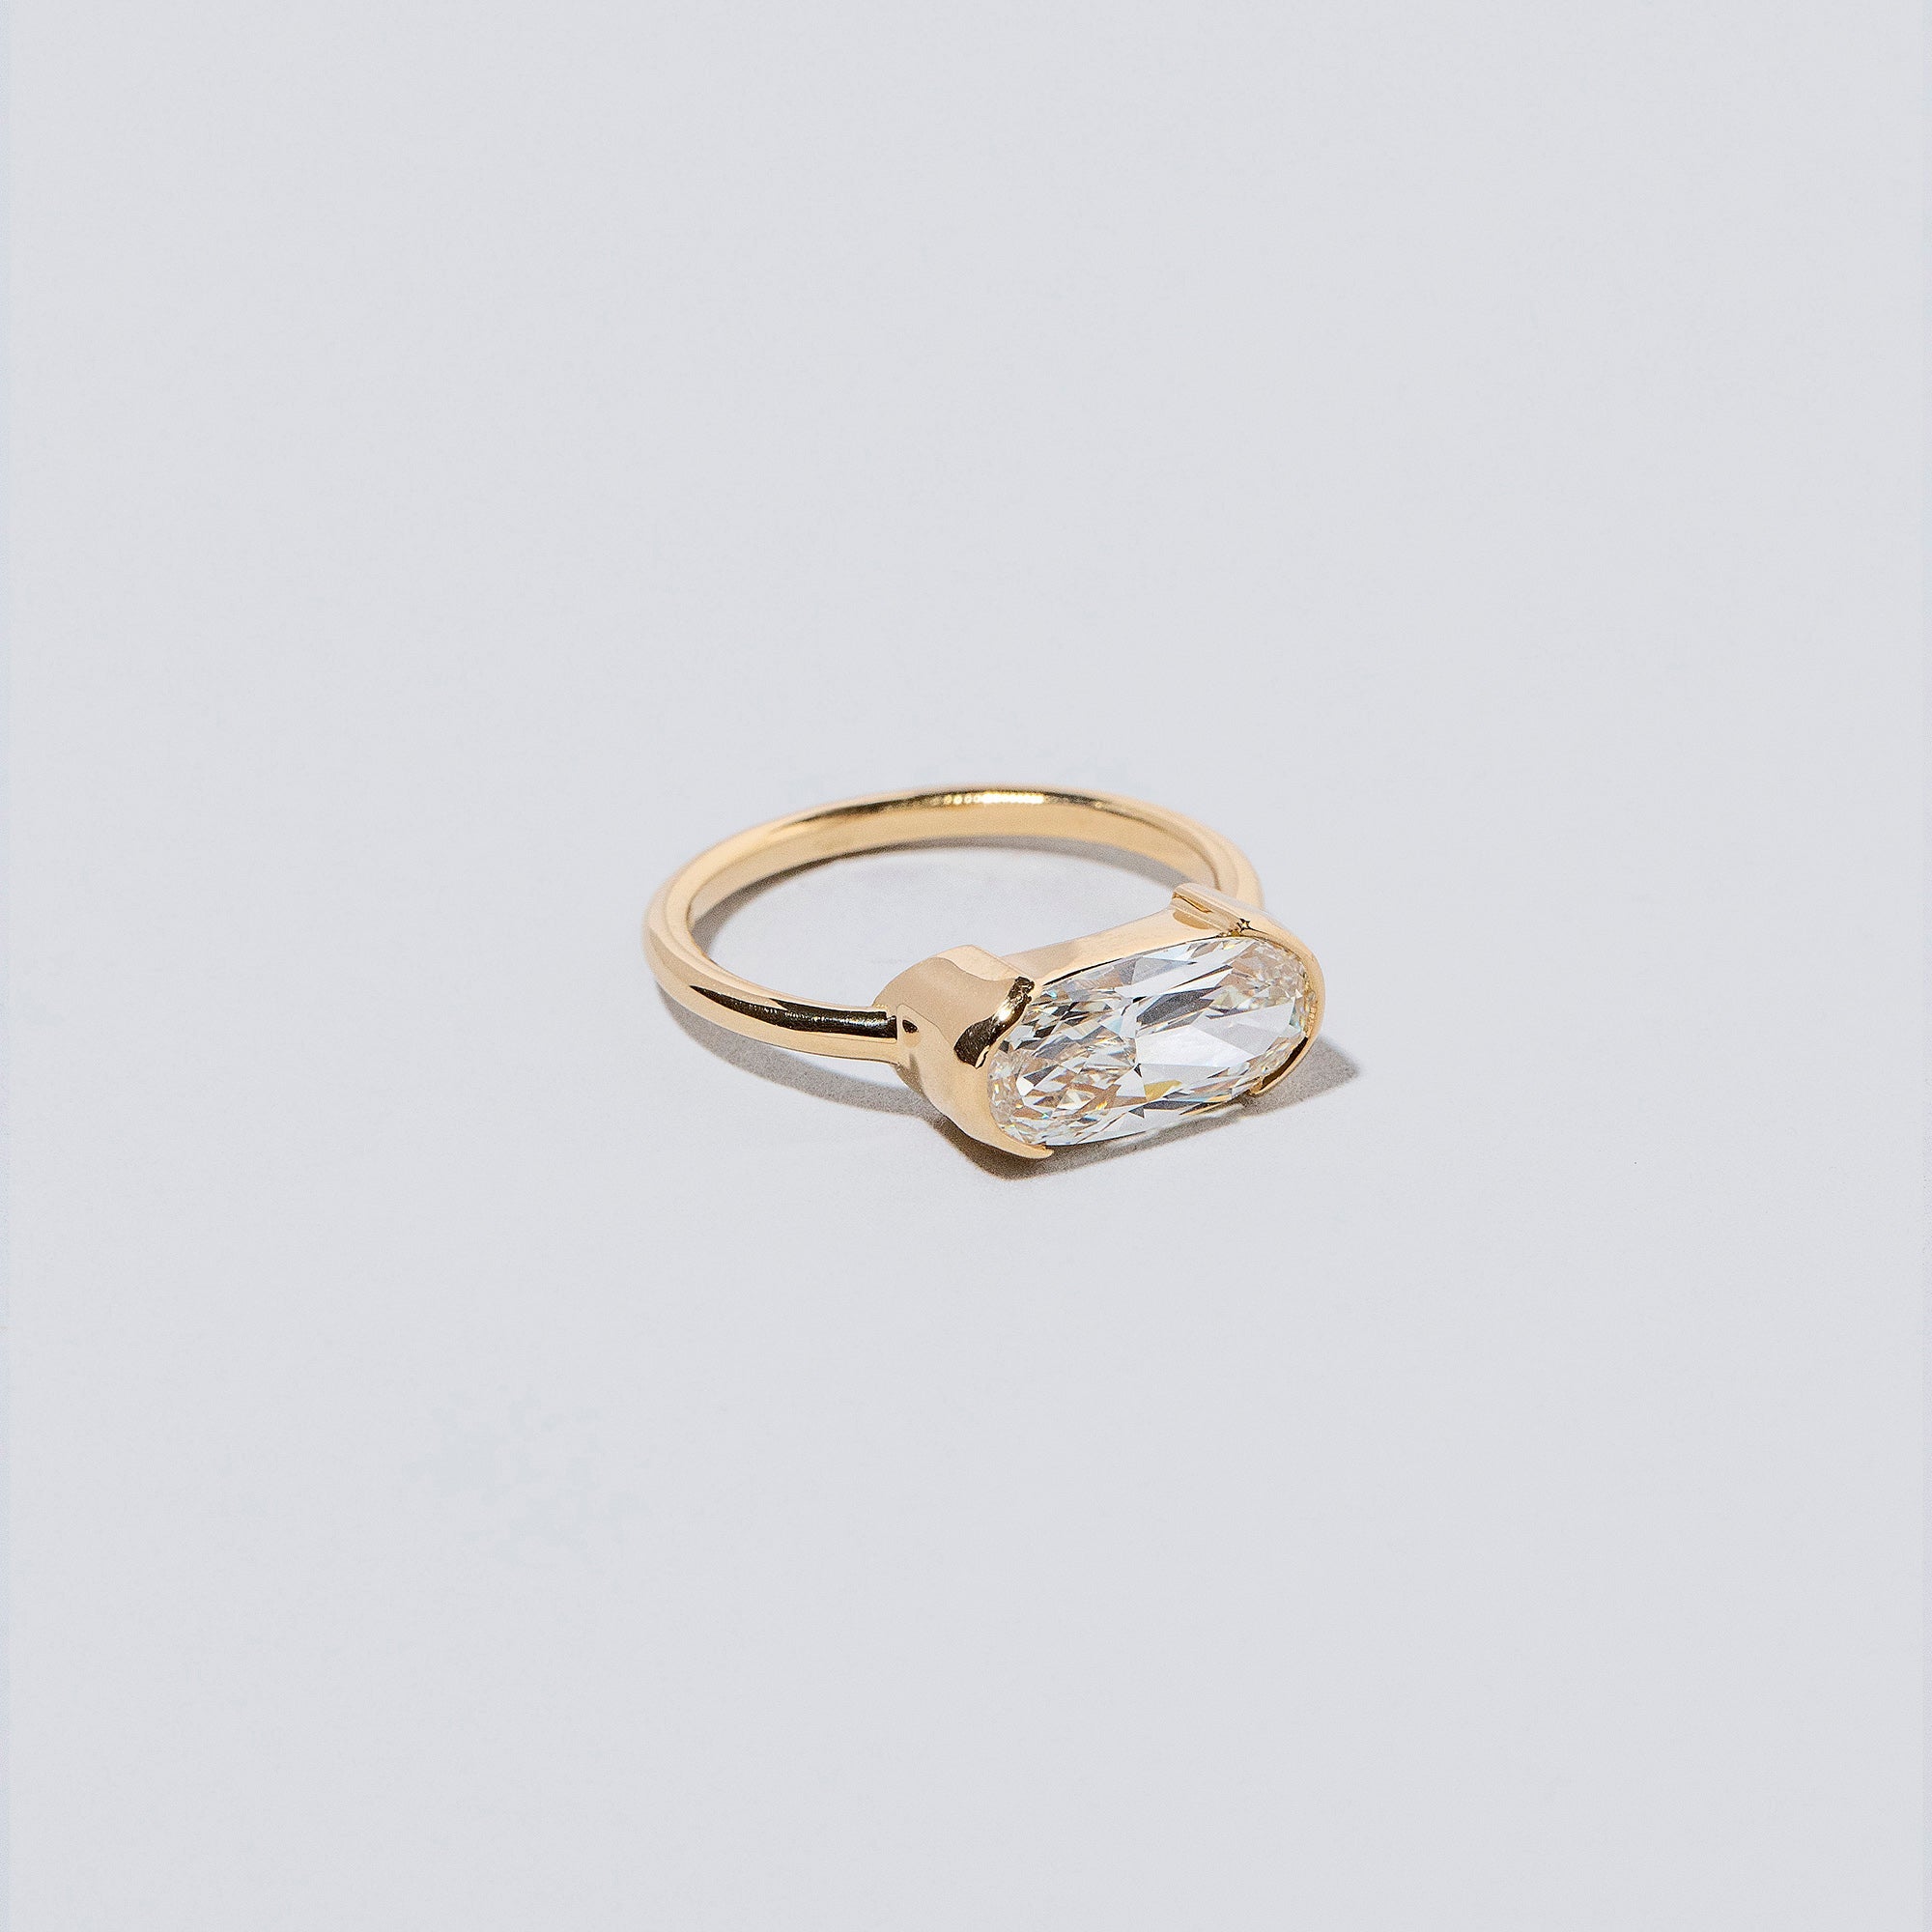 product_details::Orchestra Ring on light colored background.